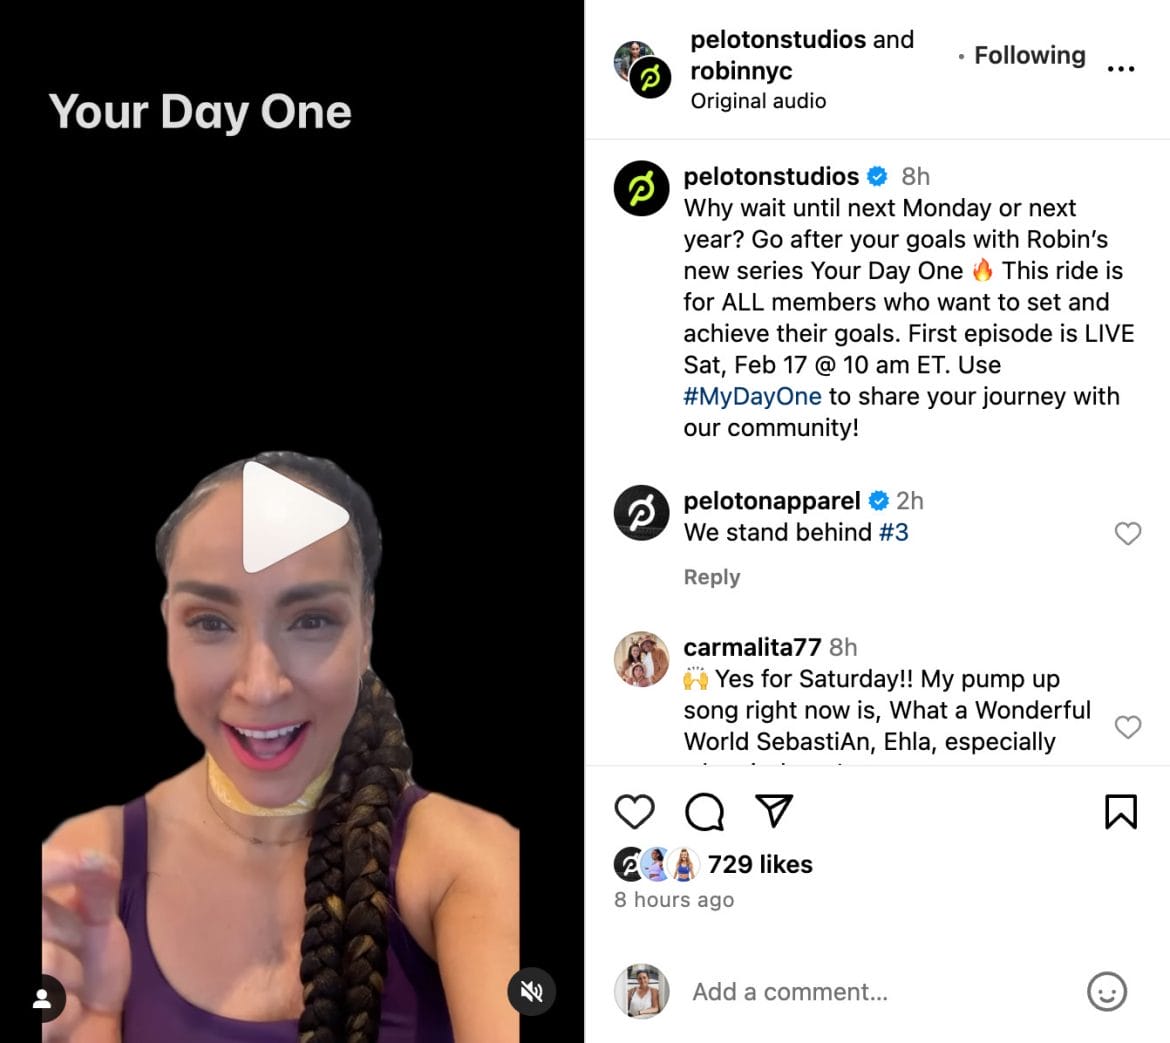 Peloton's Instagram post announcing "Your Day One" series with Robin.